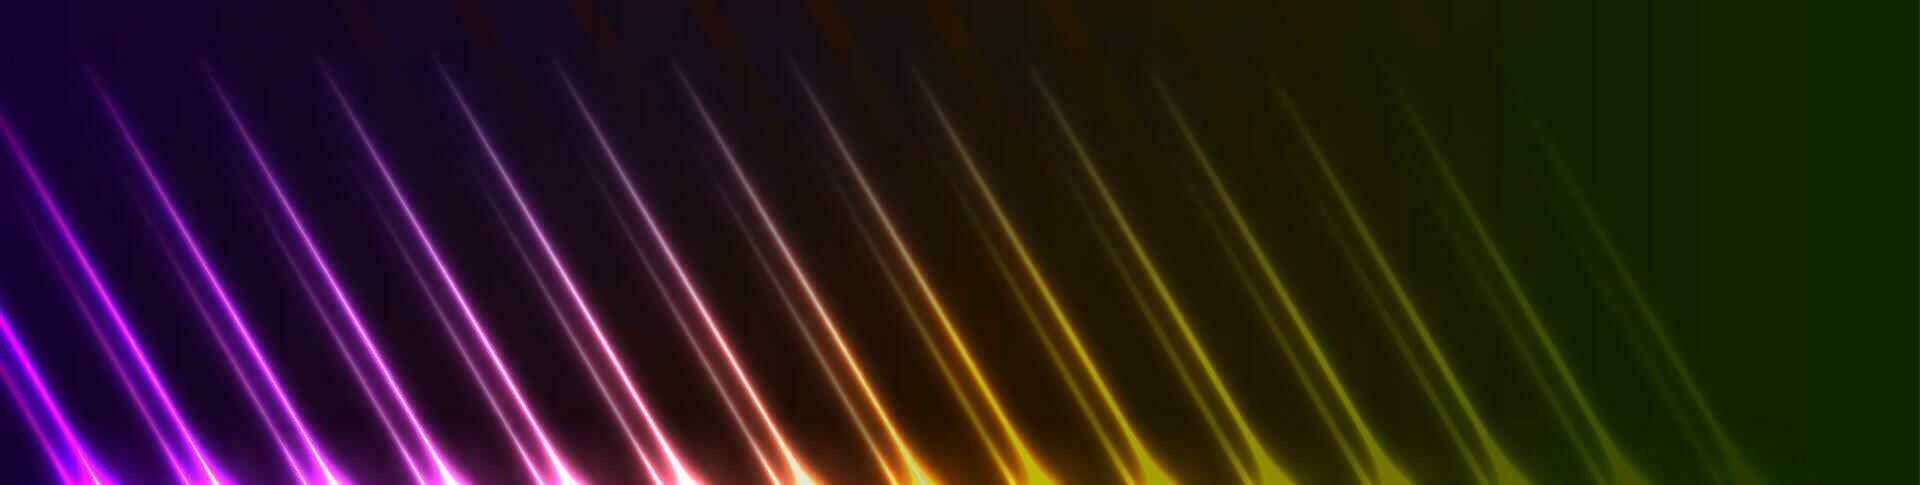 Colorful neon laser rays lines abstract background vector